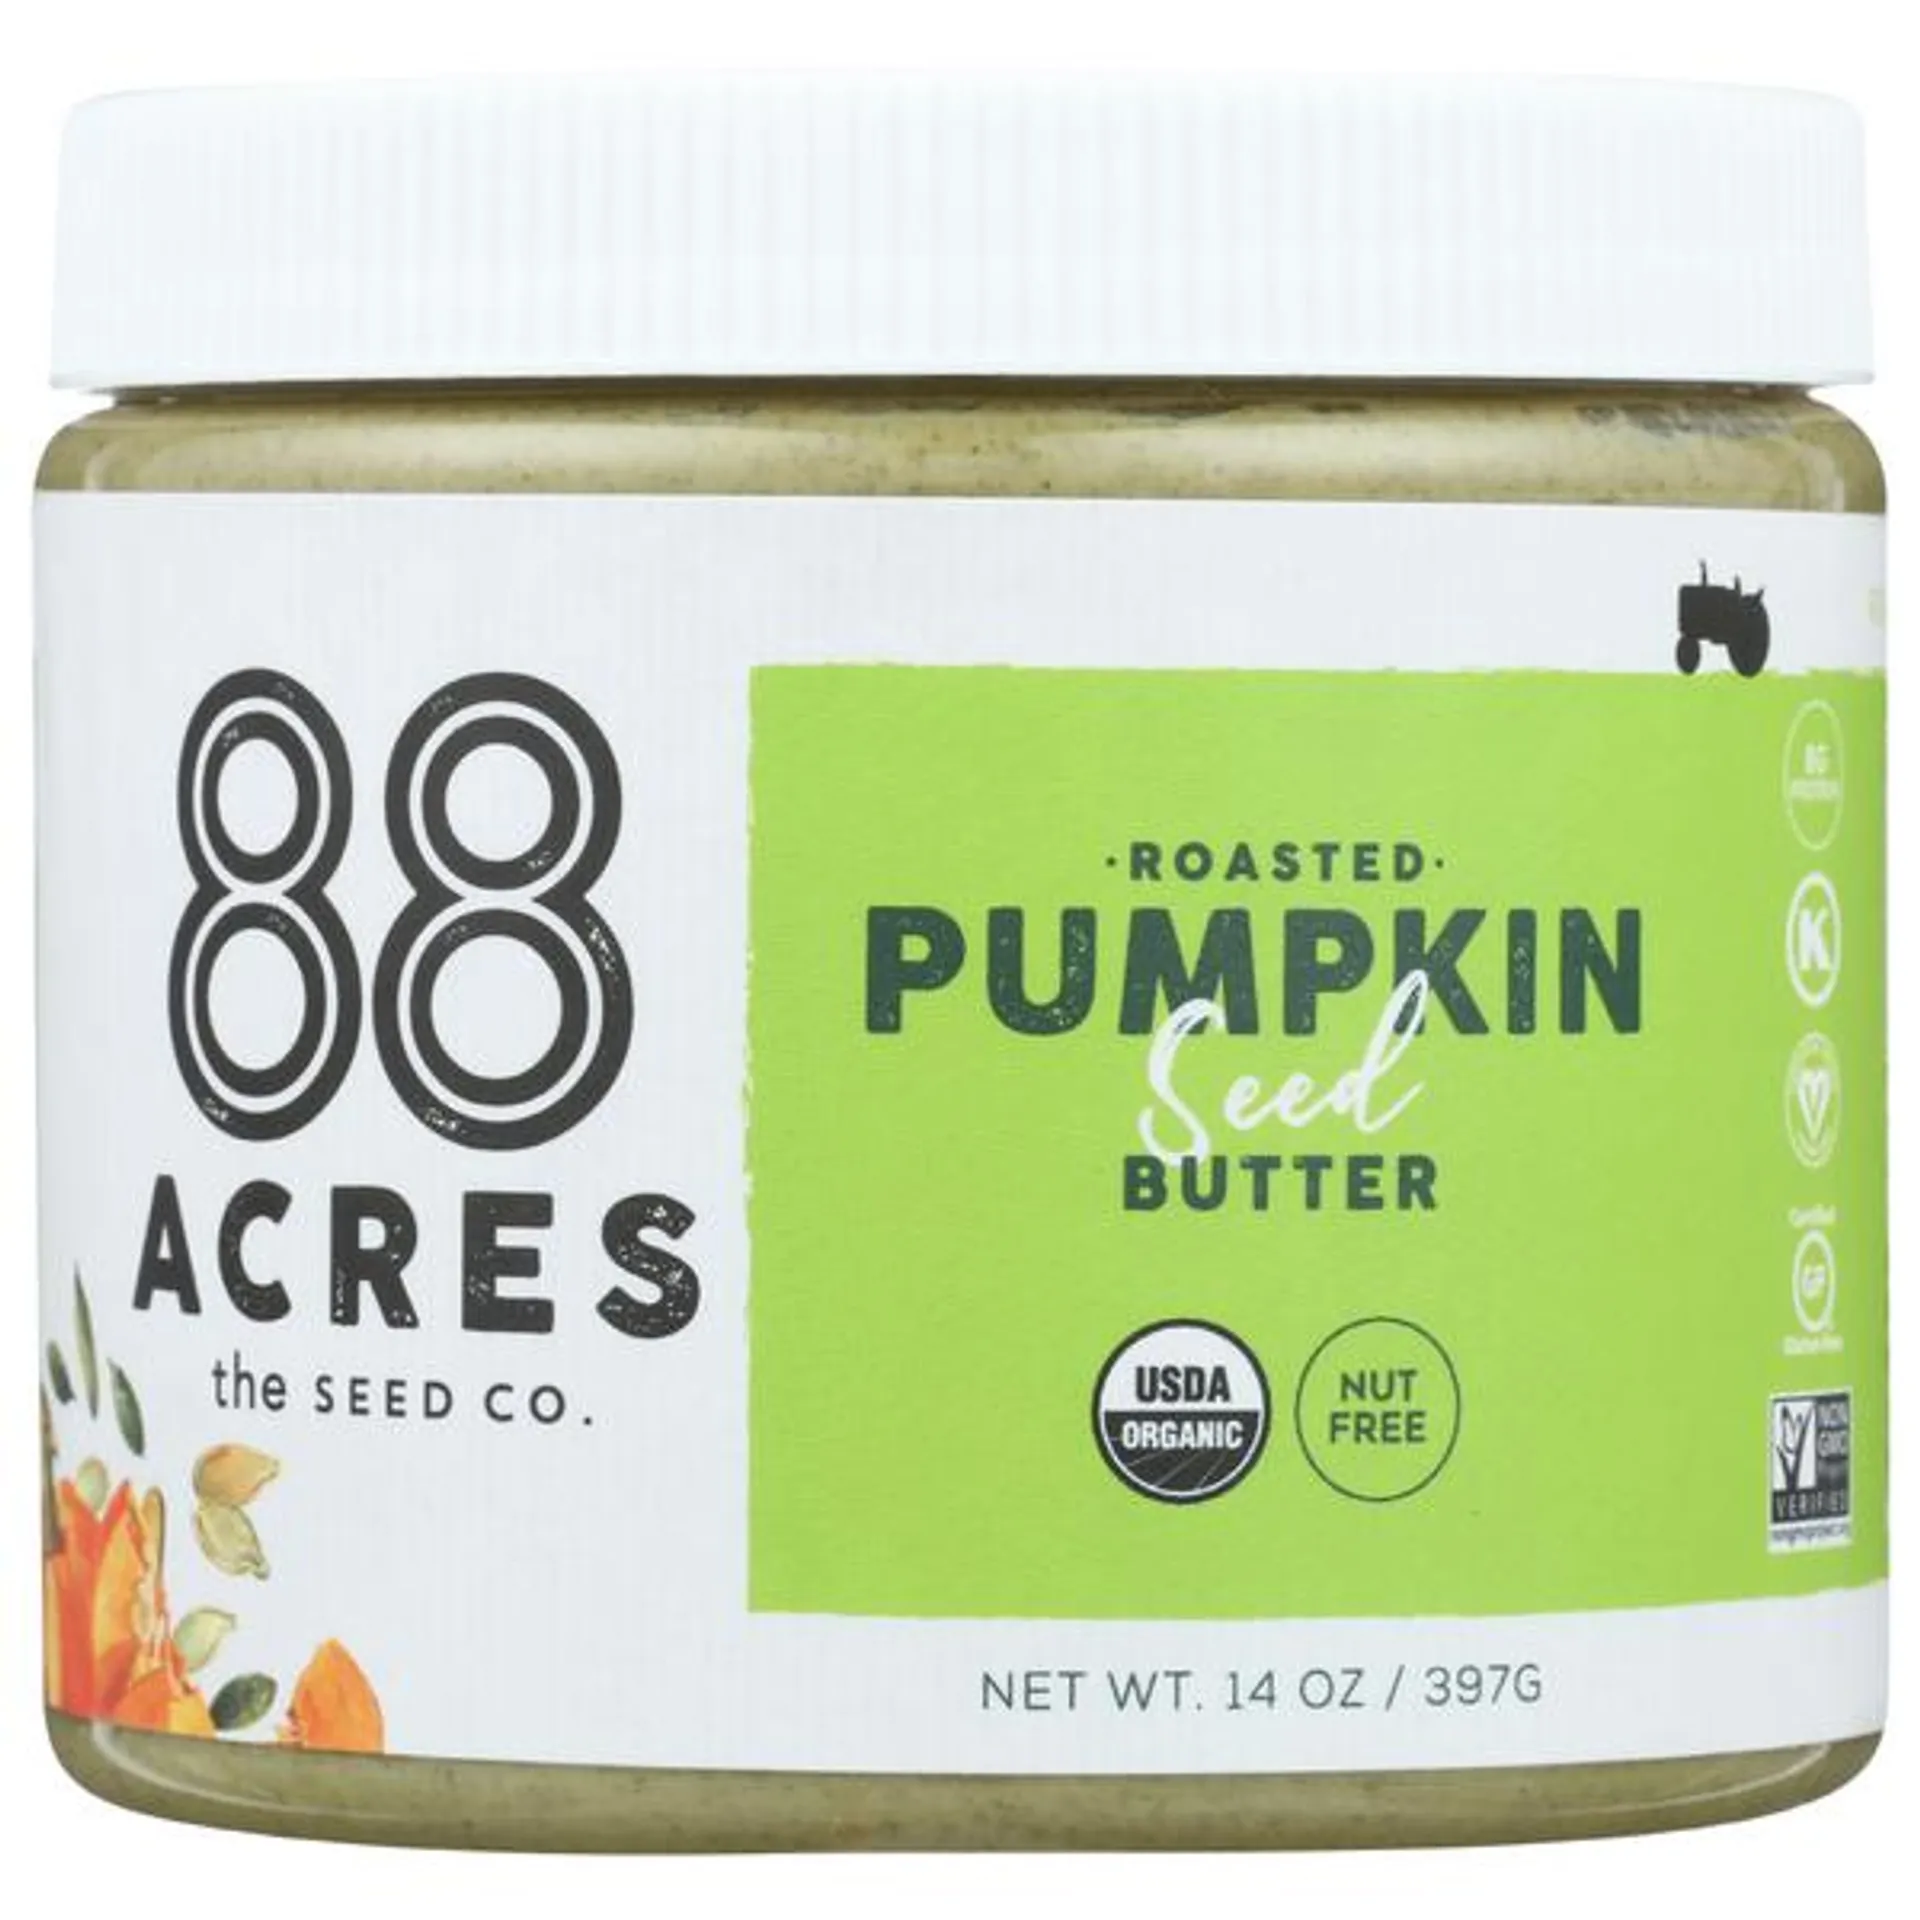 88 Acres Roasted Pumpkin Seed Butter - 14 Ounce